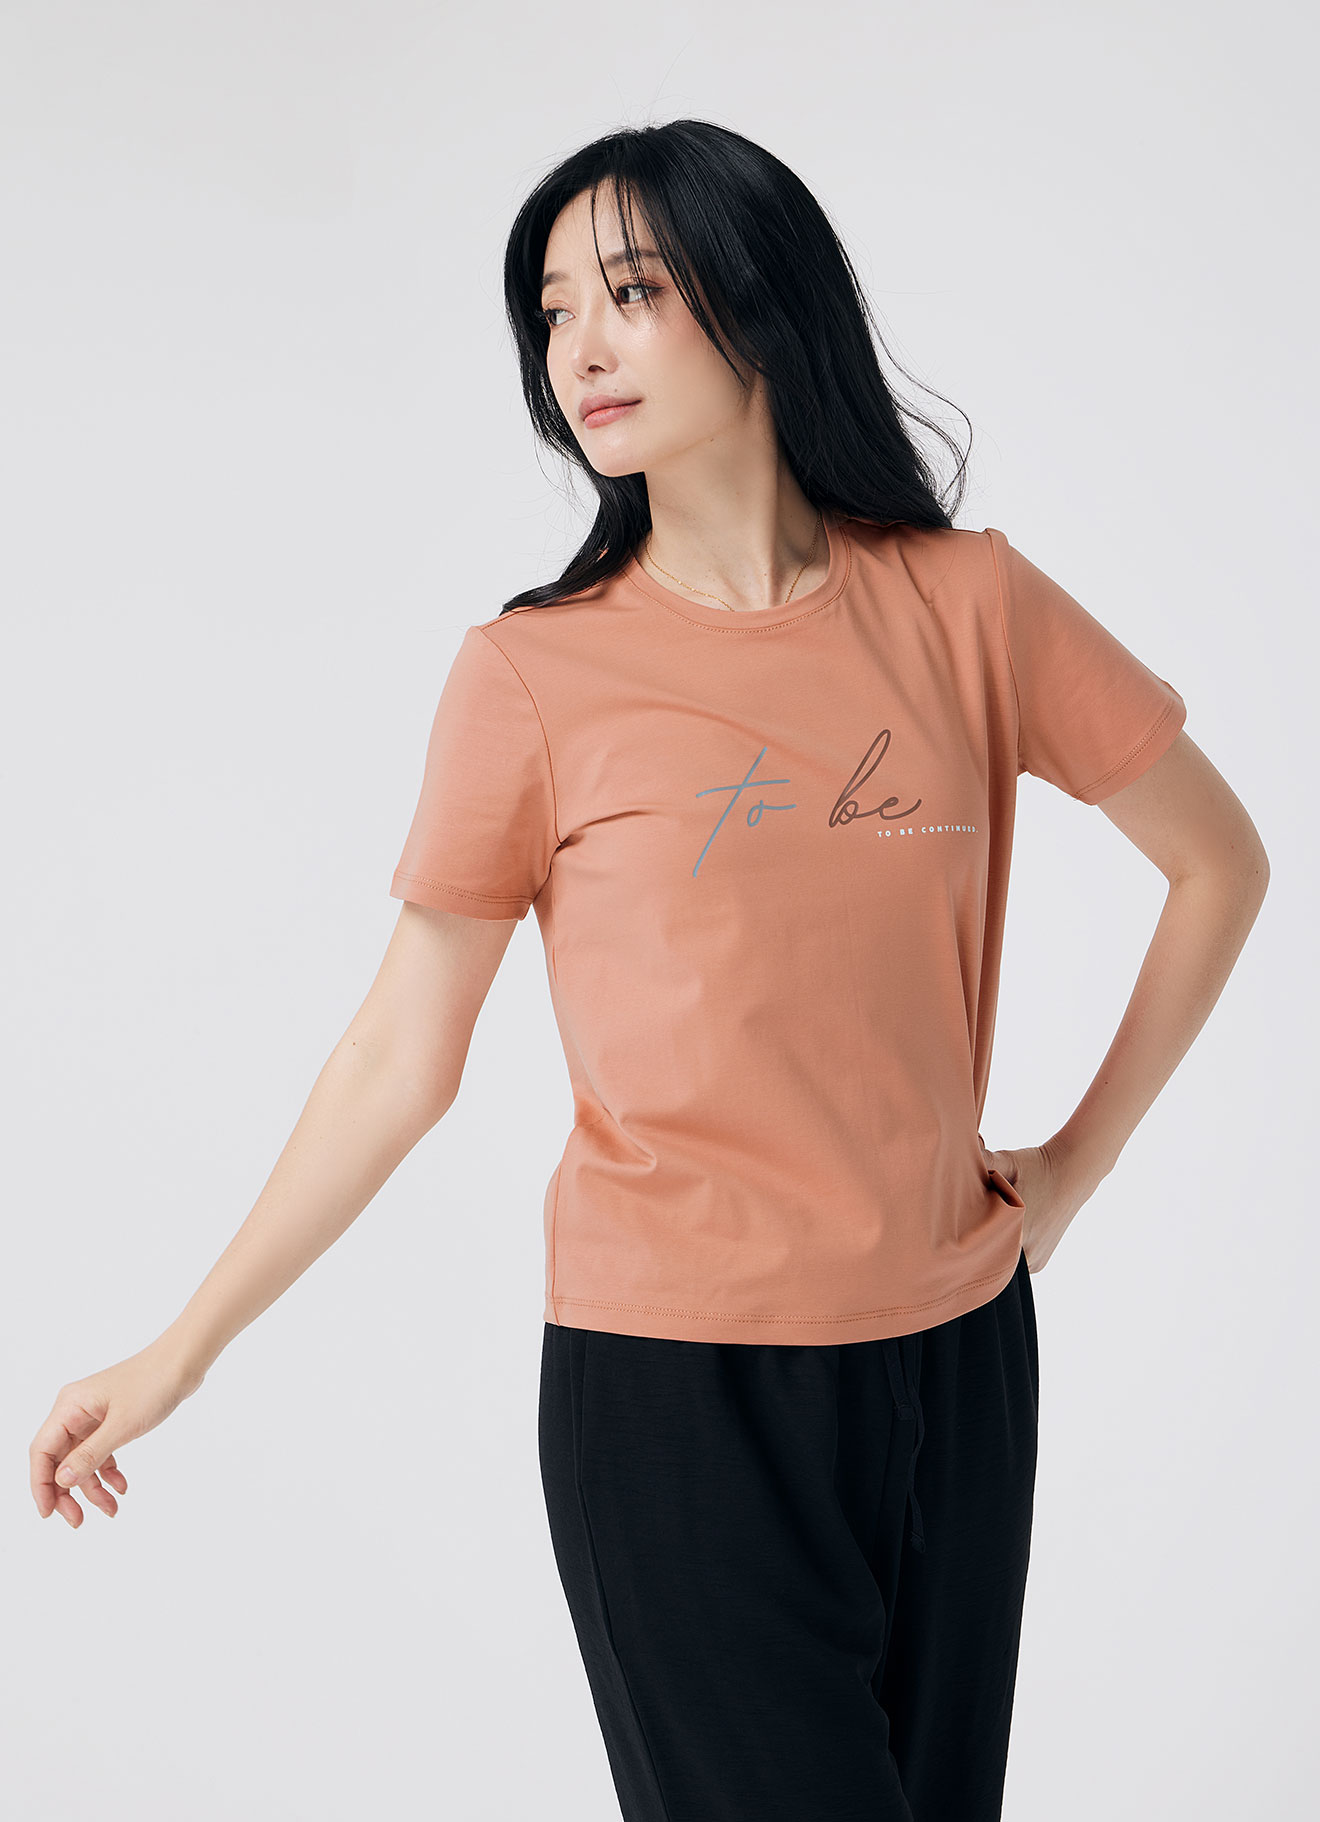 Brandied-Melon  by Printed Top